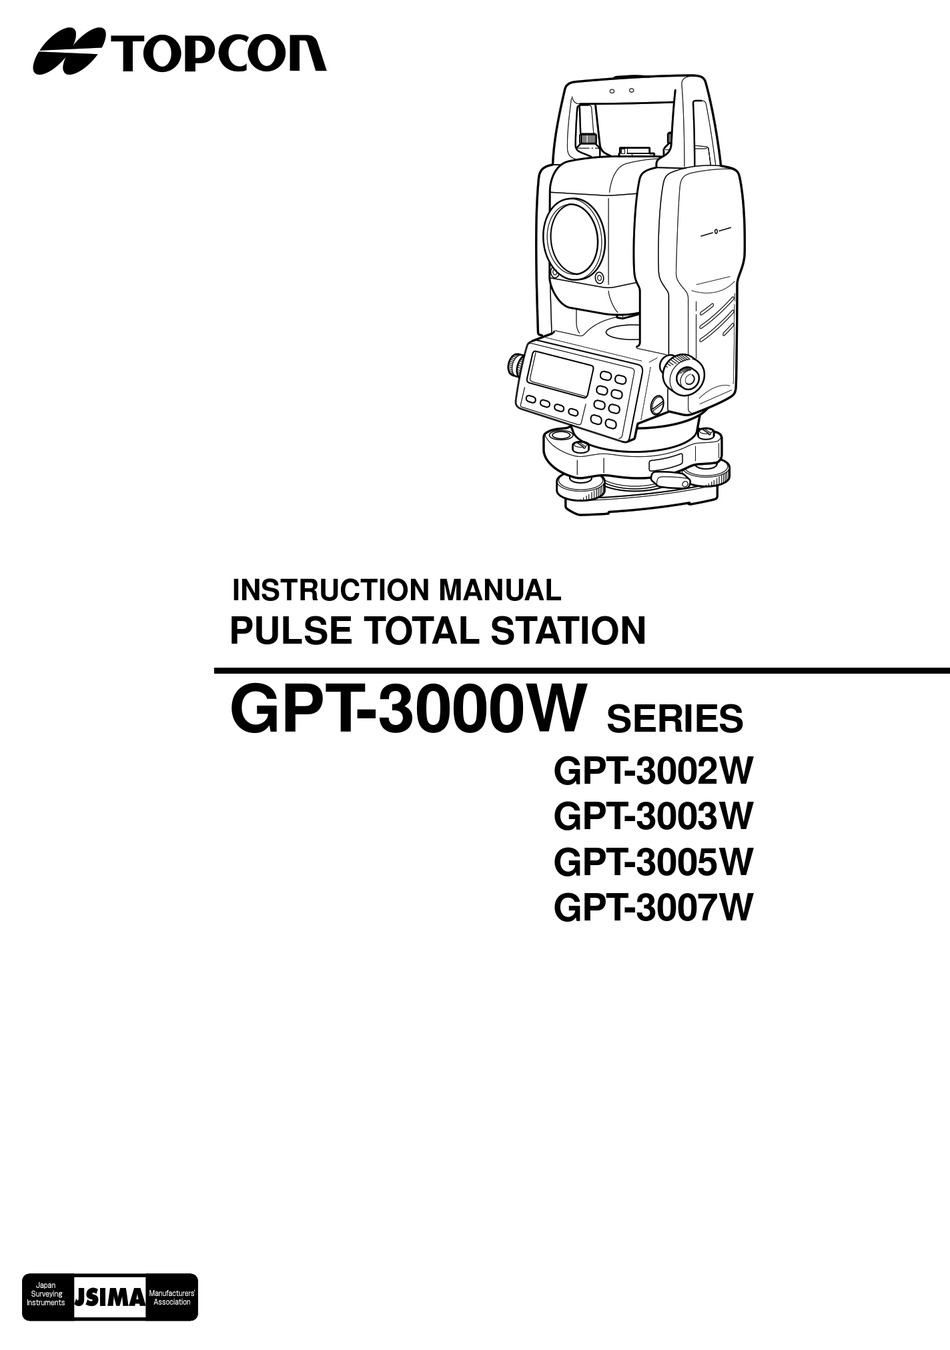 New Topcon Total Station Manuals GPT GTS 